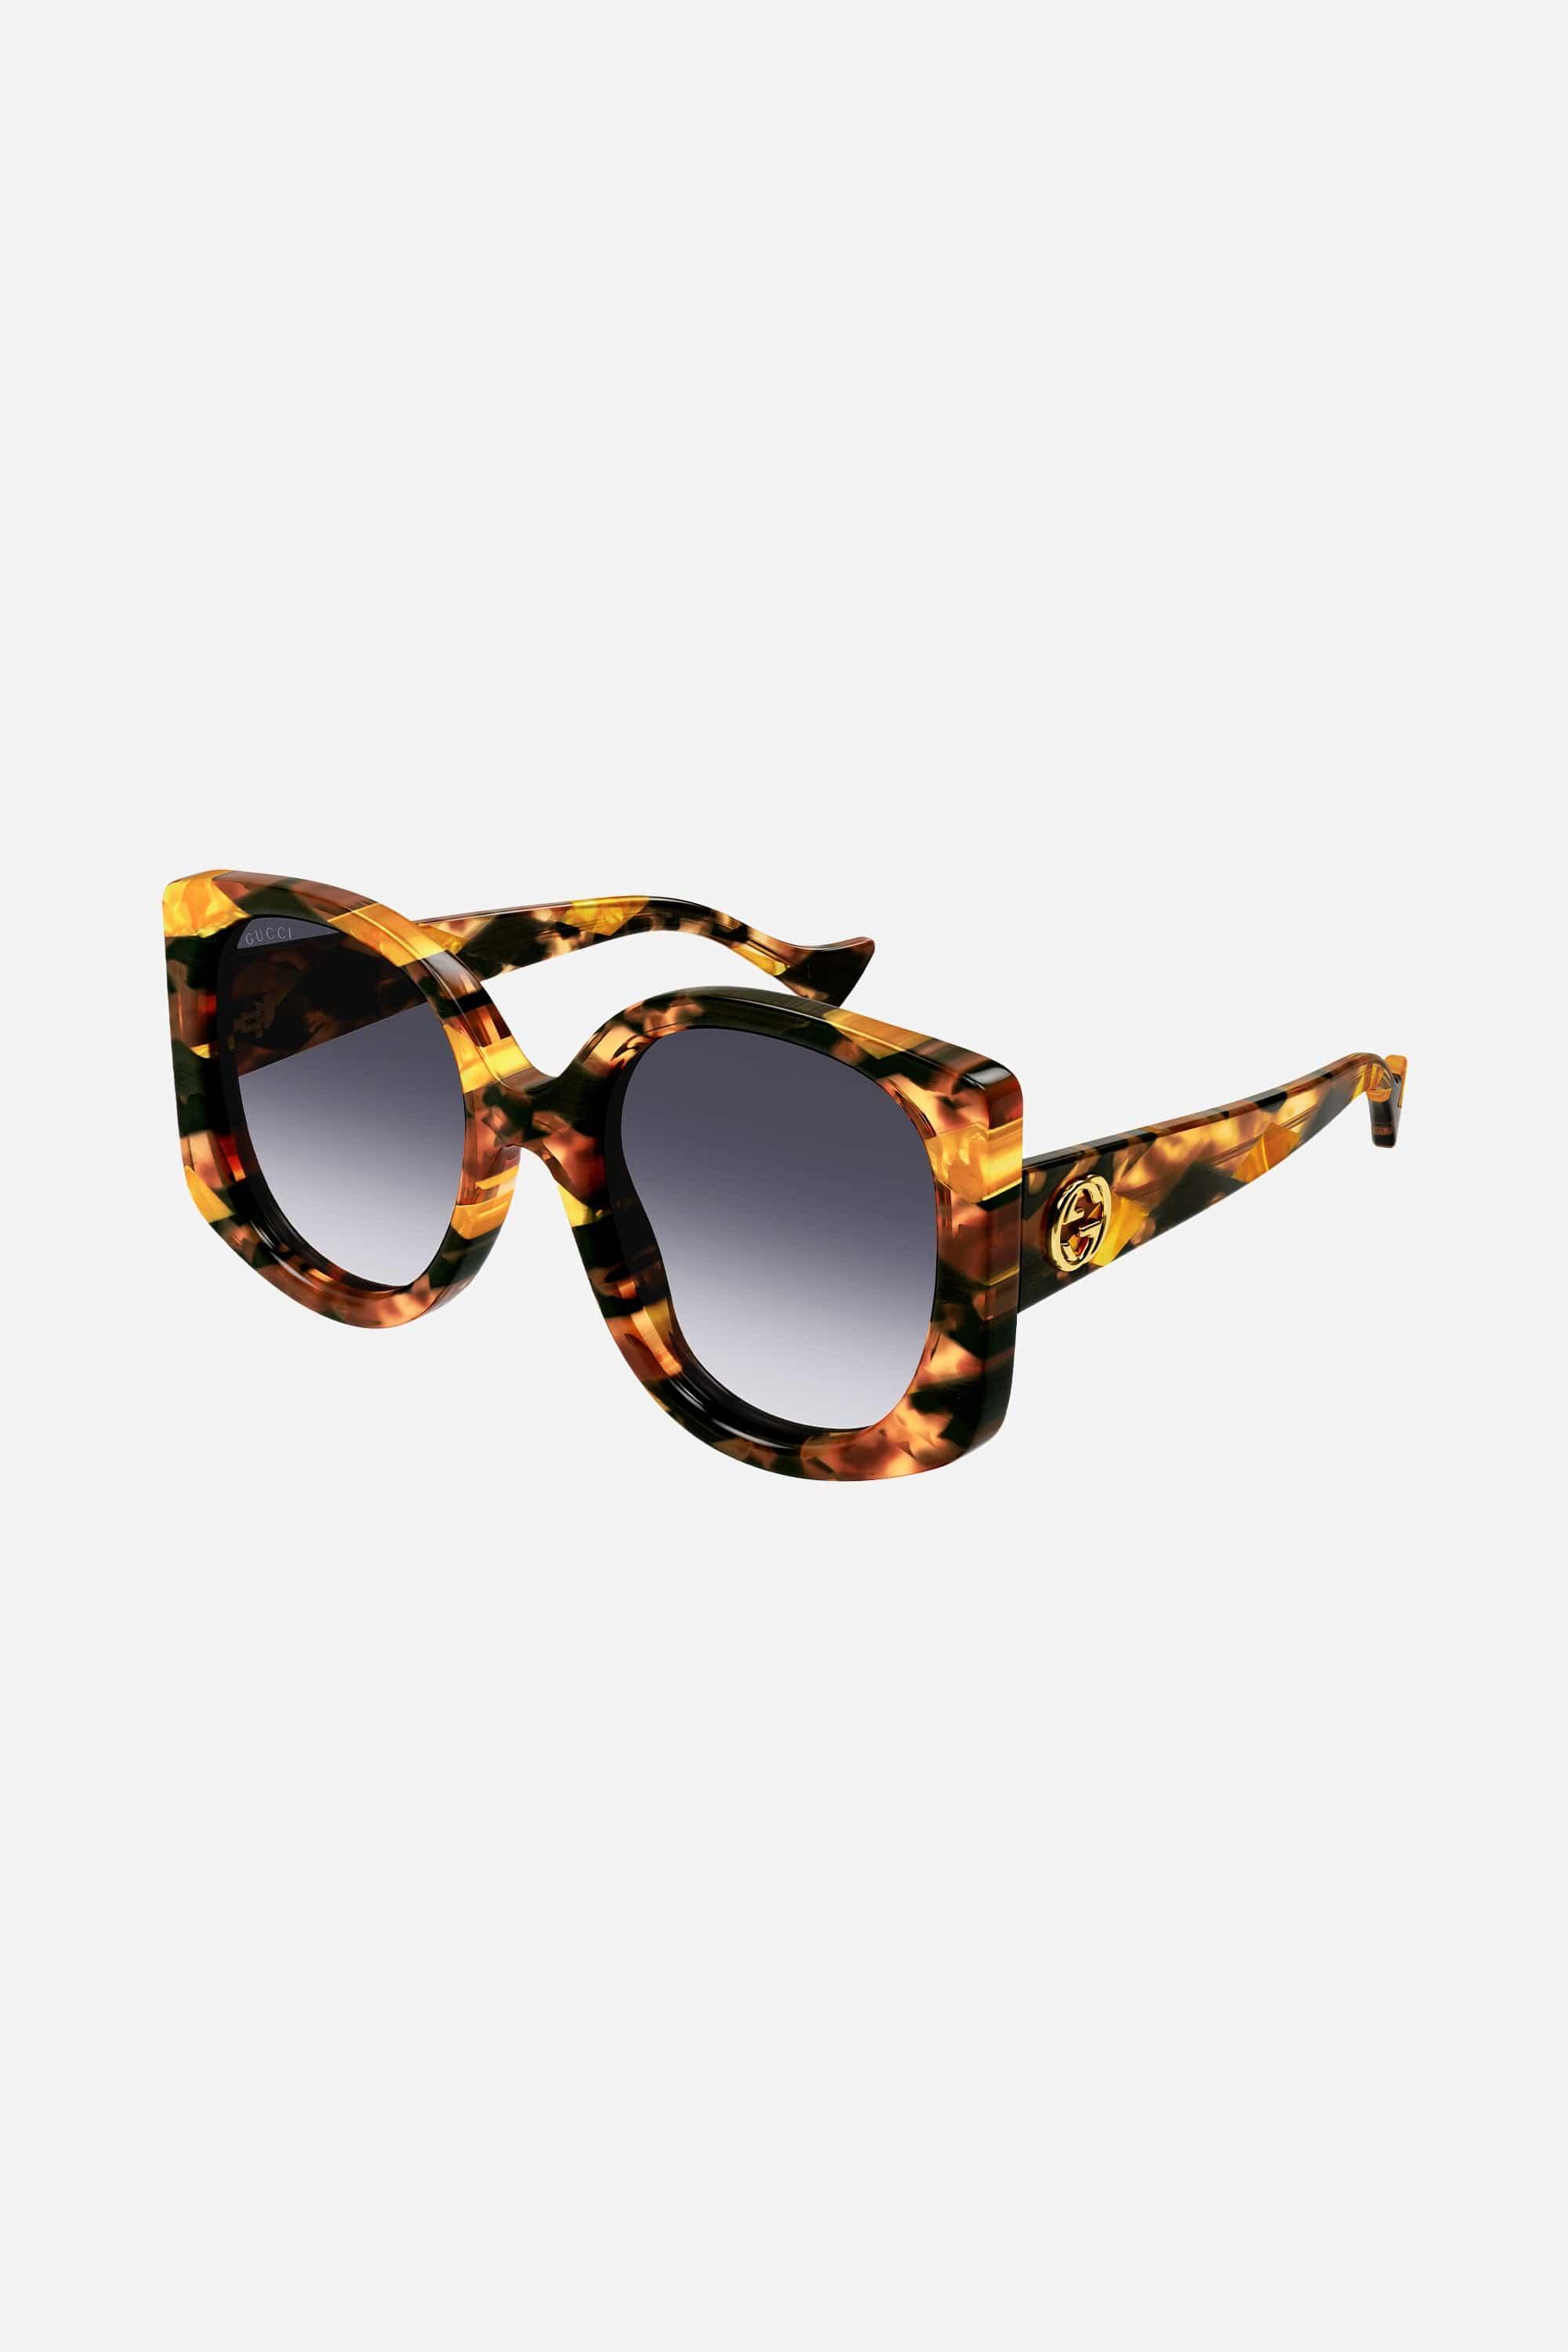 Gucci GG1257s Oversized Butterfly Multicolor GG Sunglasses in Brown | Lyst